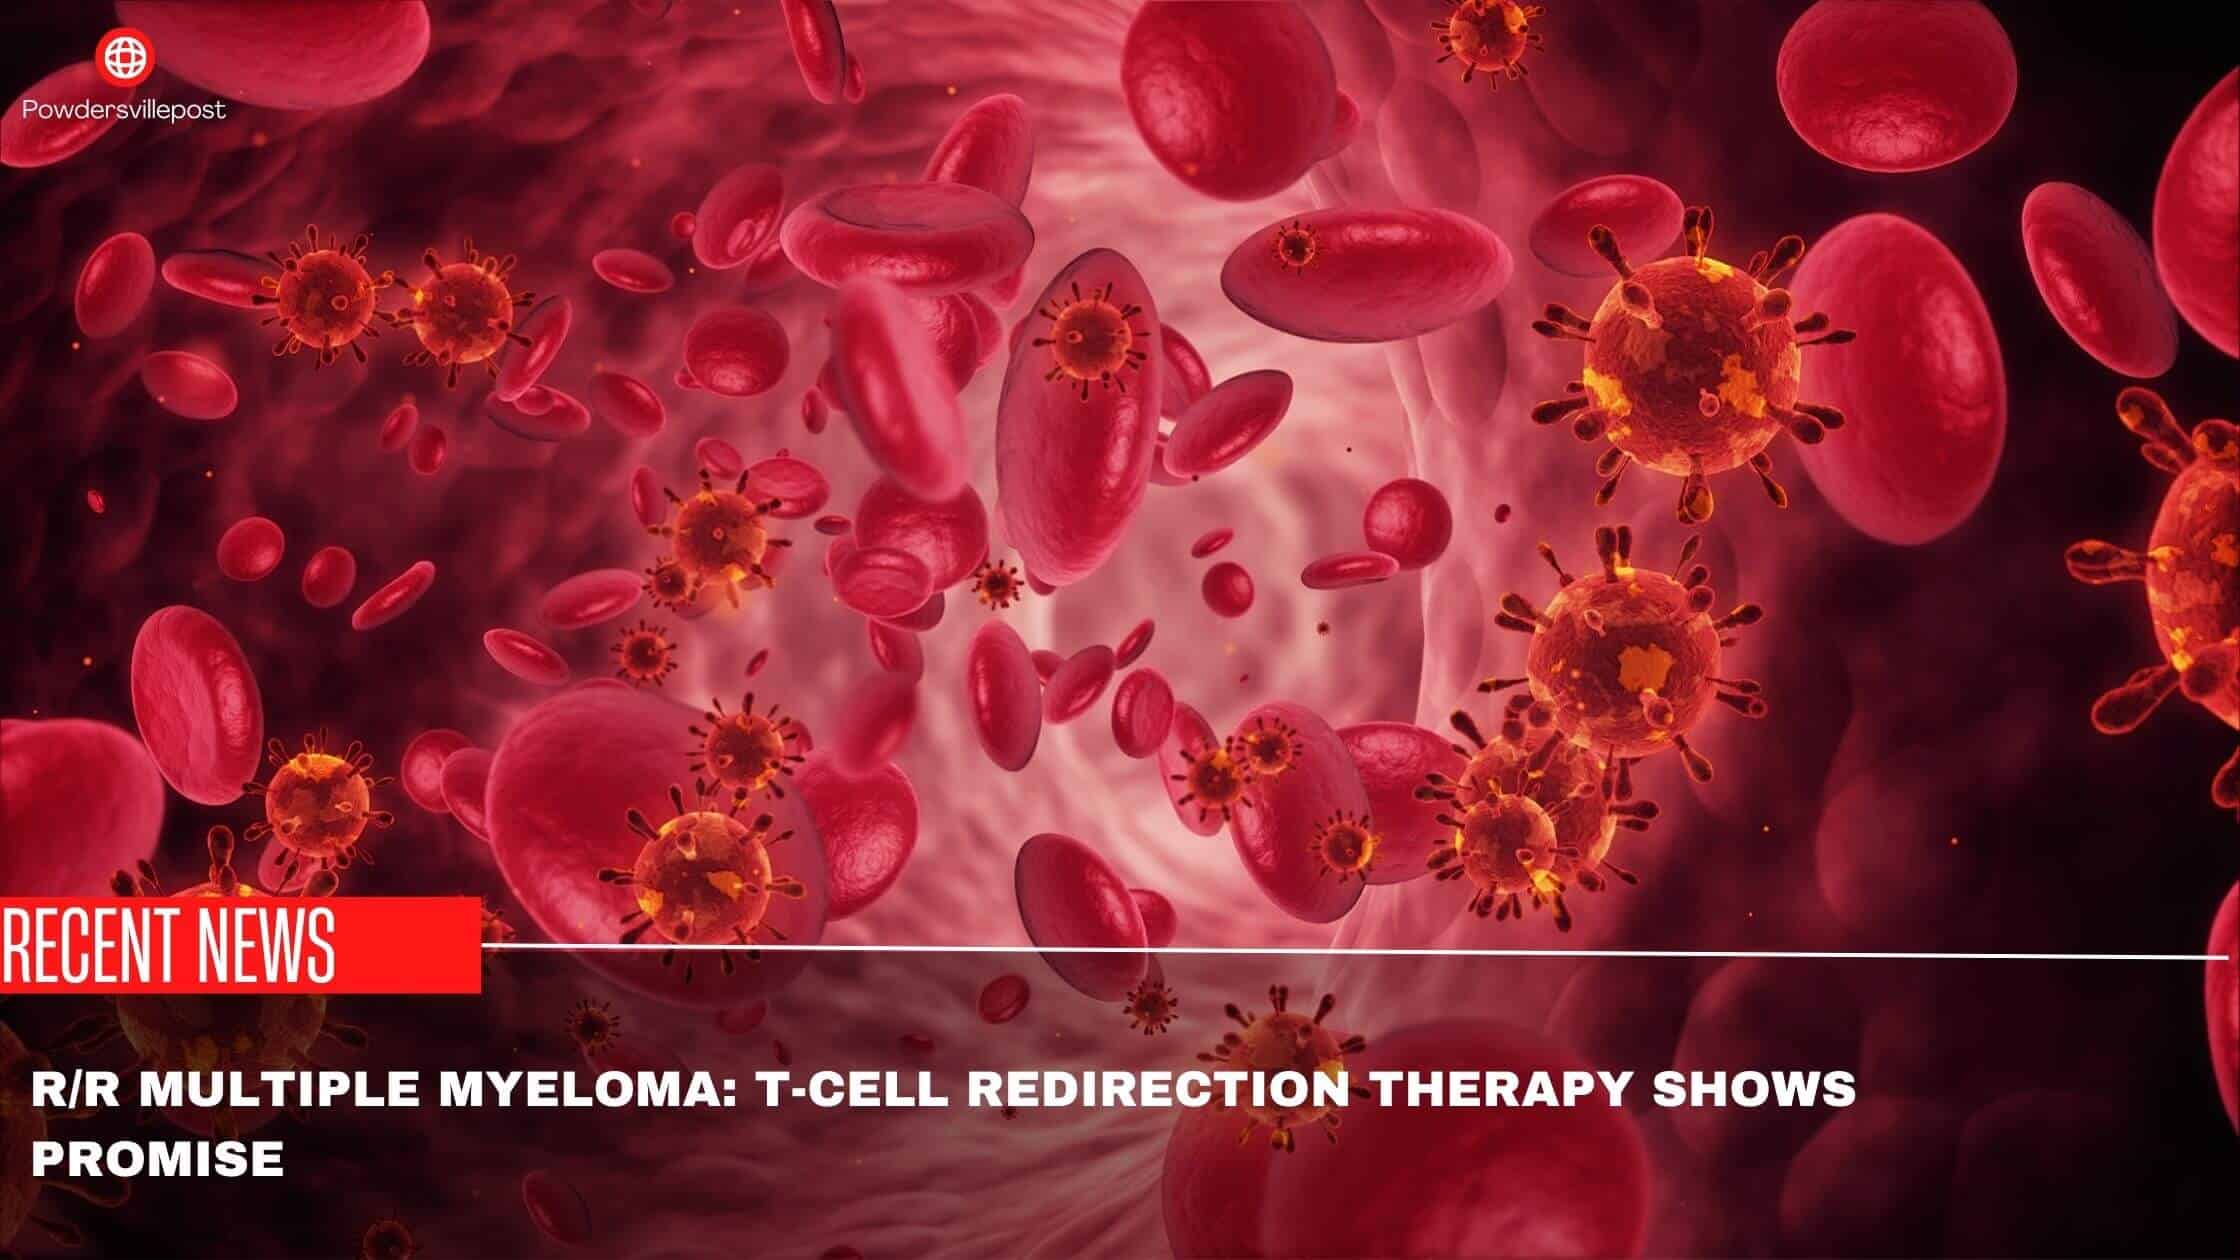 RR Multiple Myeloma T-cell Redirection Therapy Shows Promise